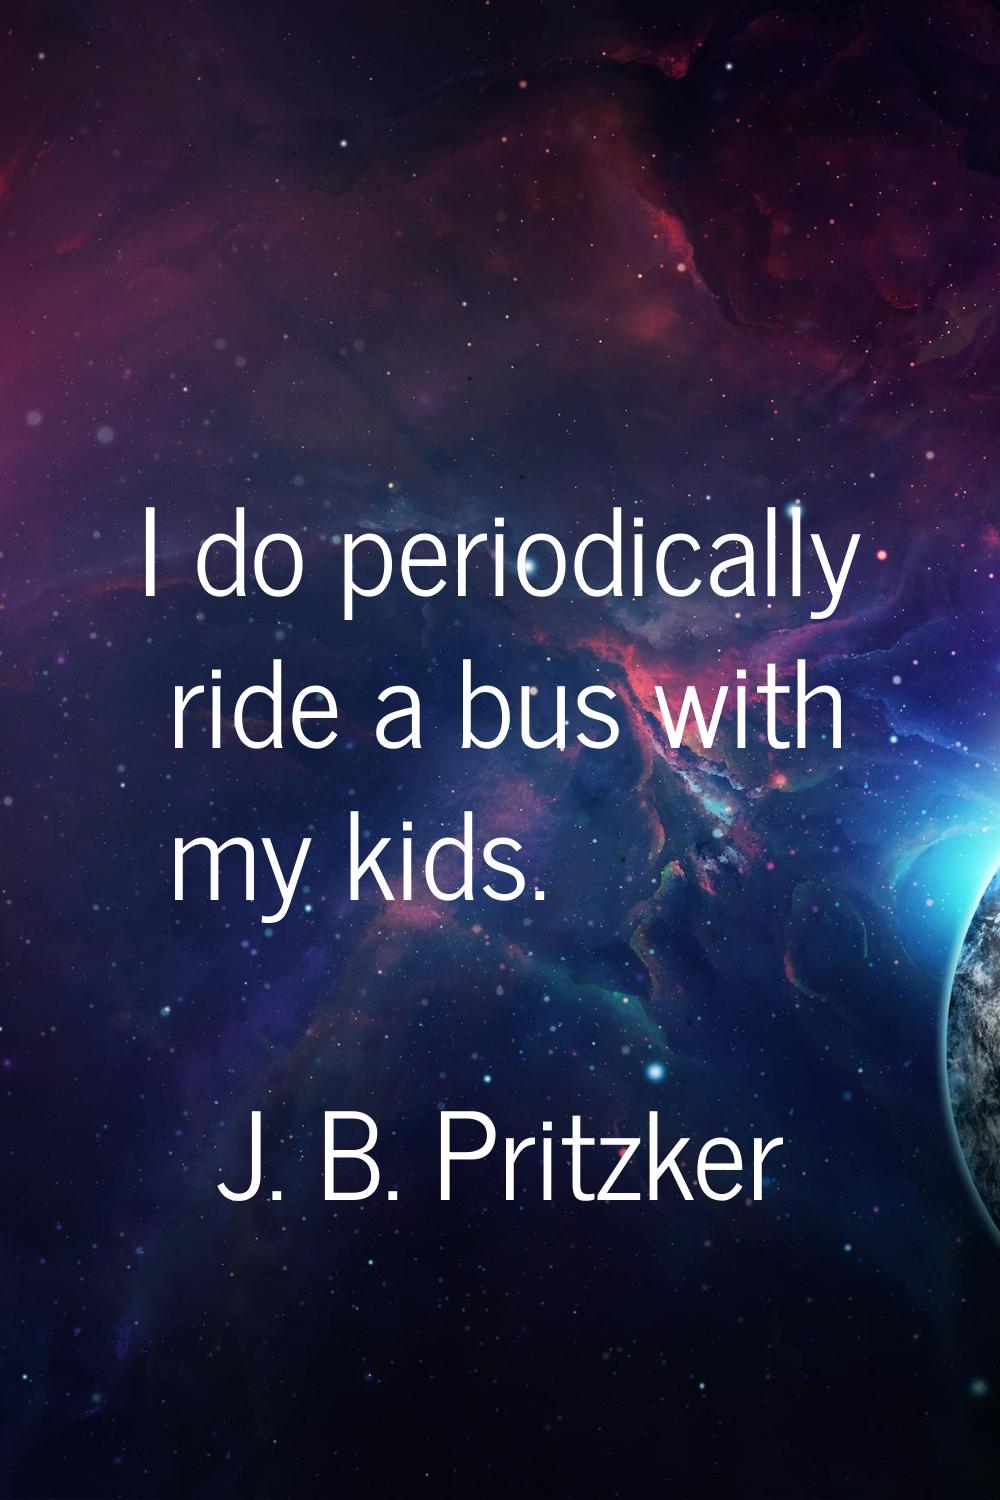 I do periodically ride a bus with my kids.